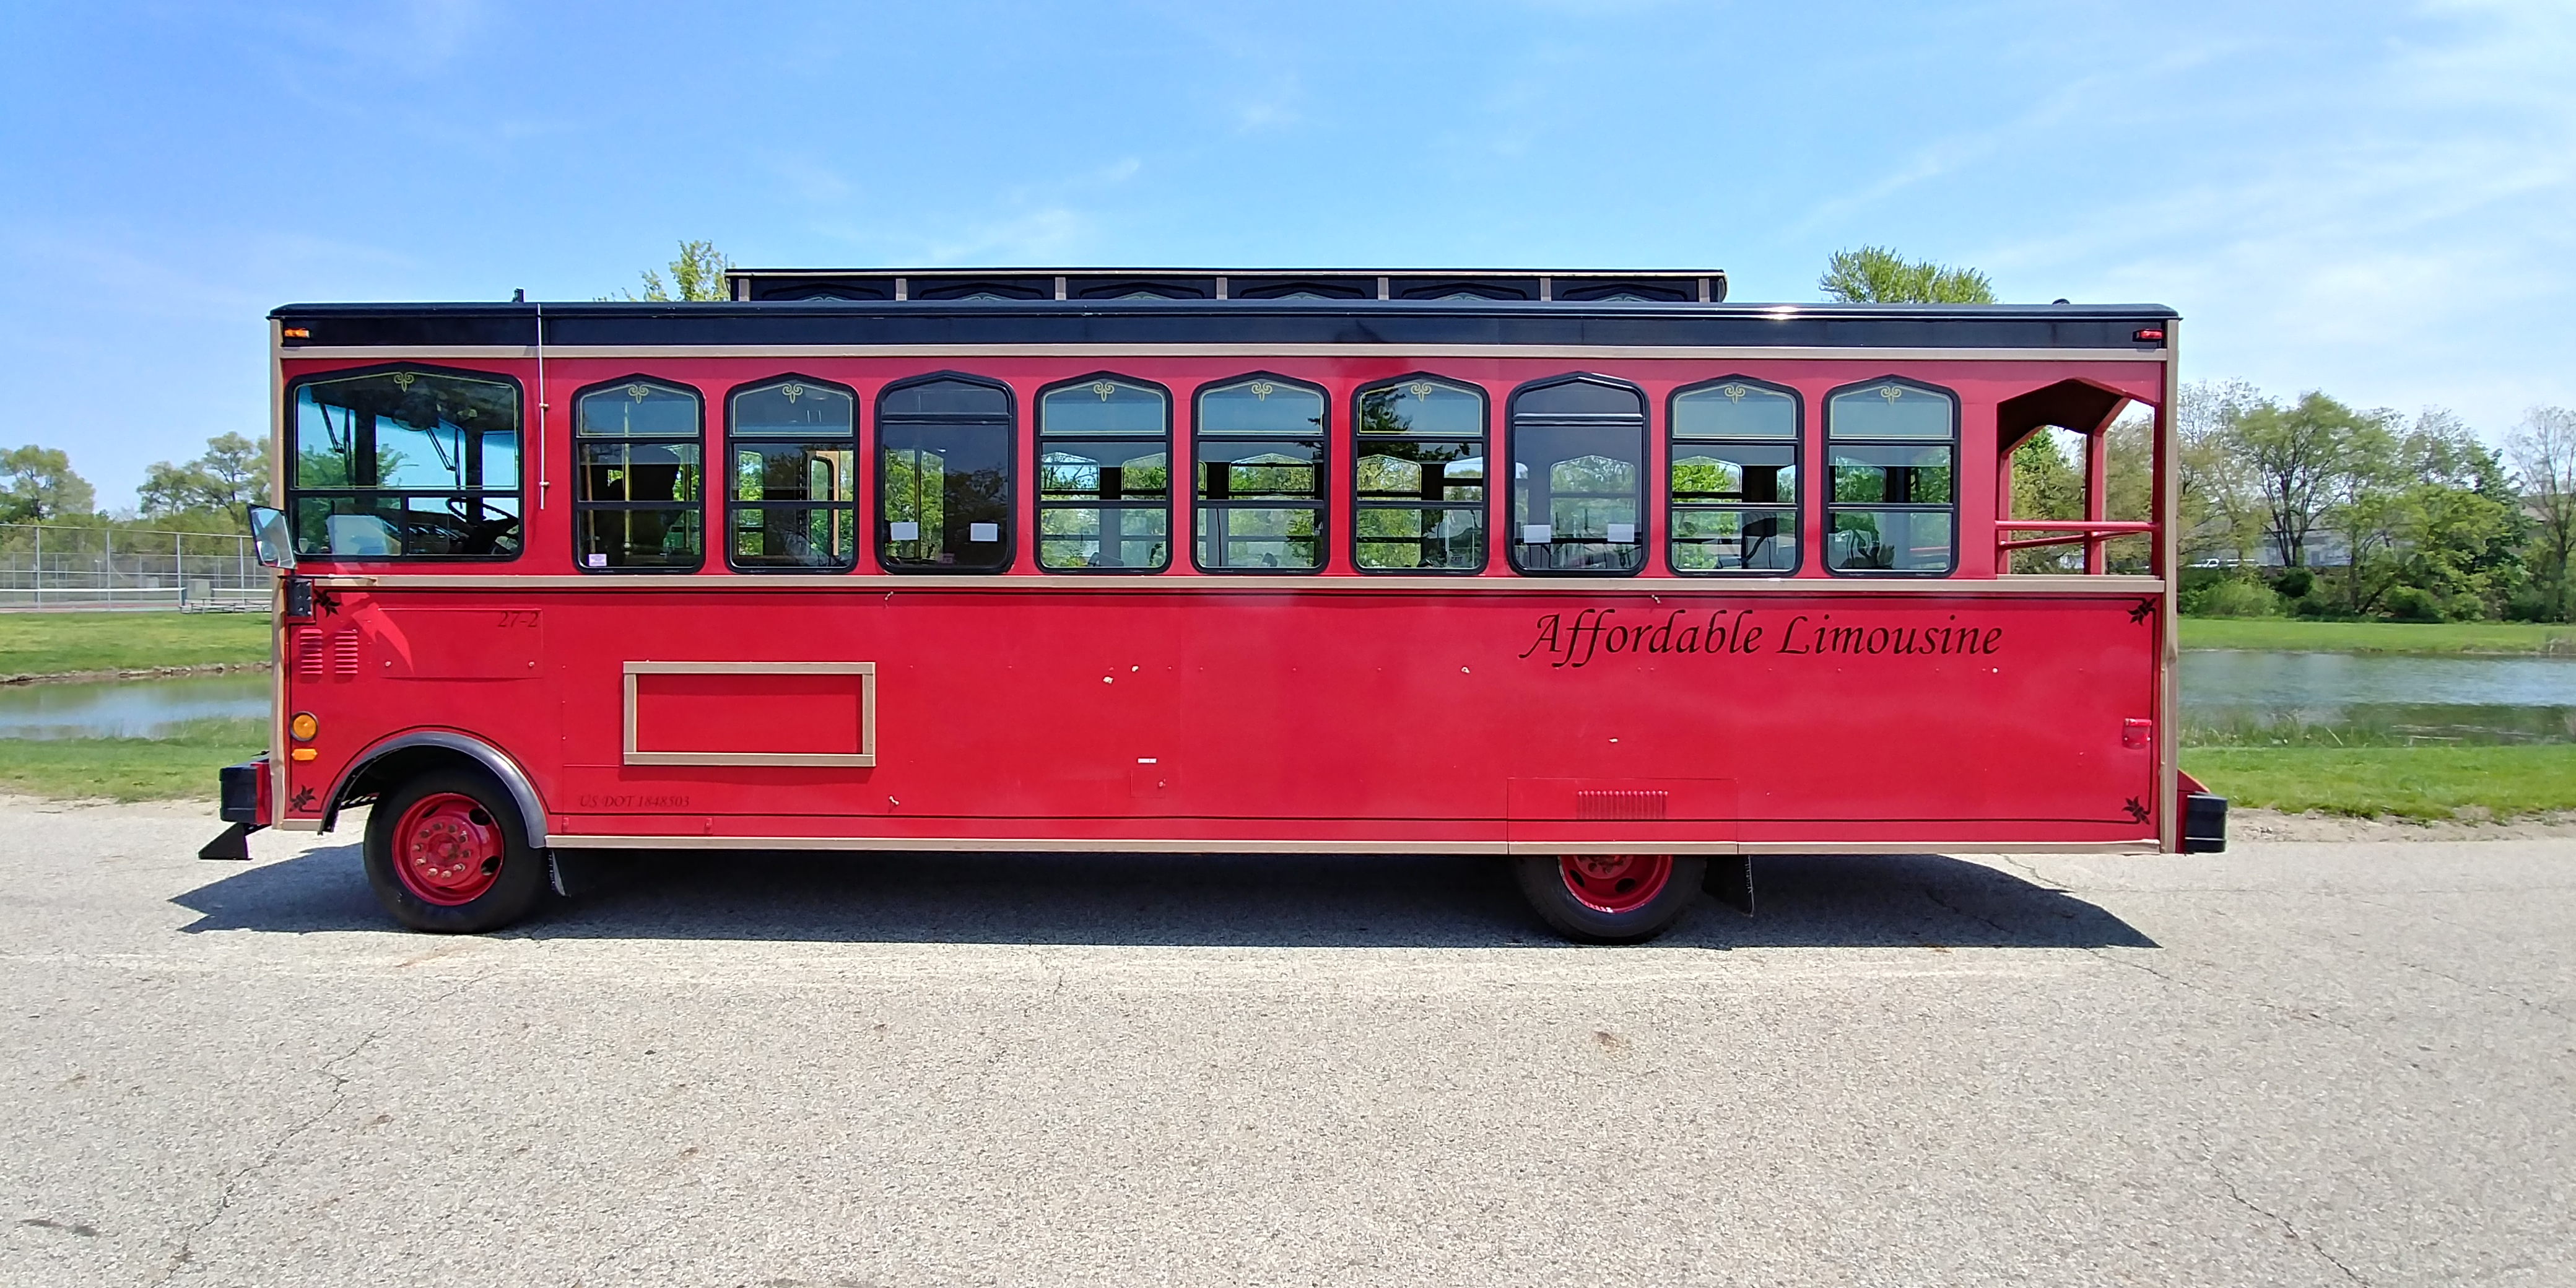 Trolley Rentals in Grand Rapids/West Michigan - Affordable Limousine